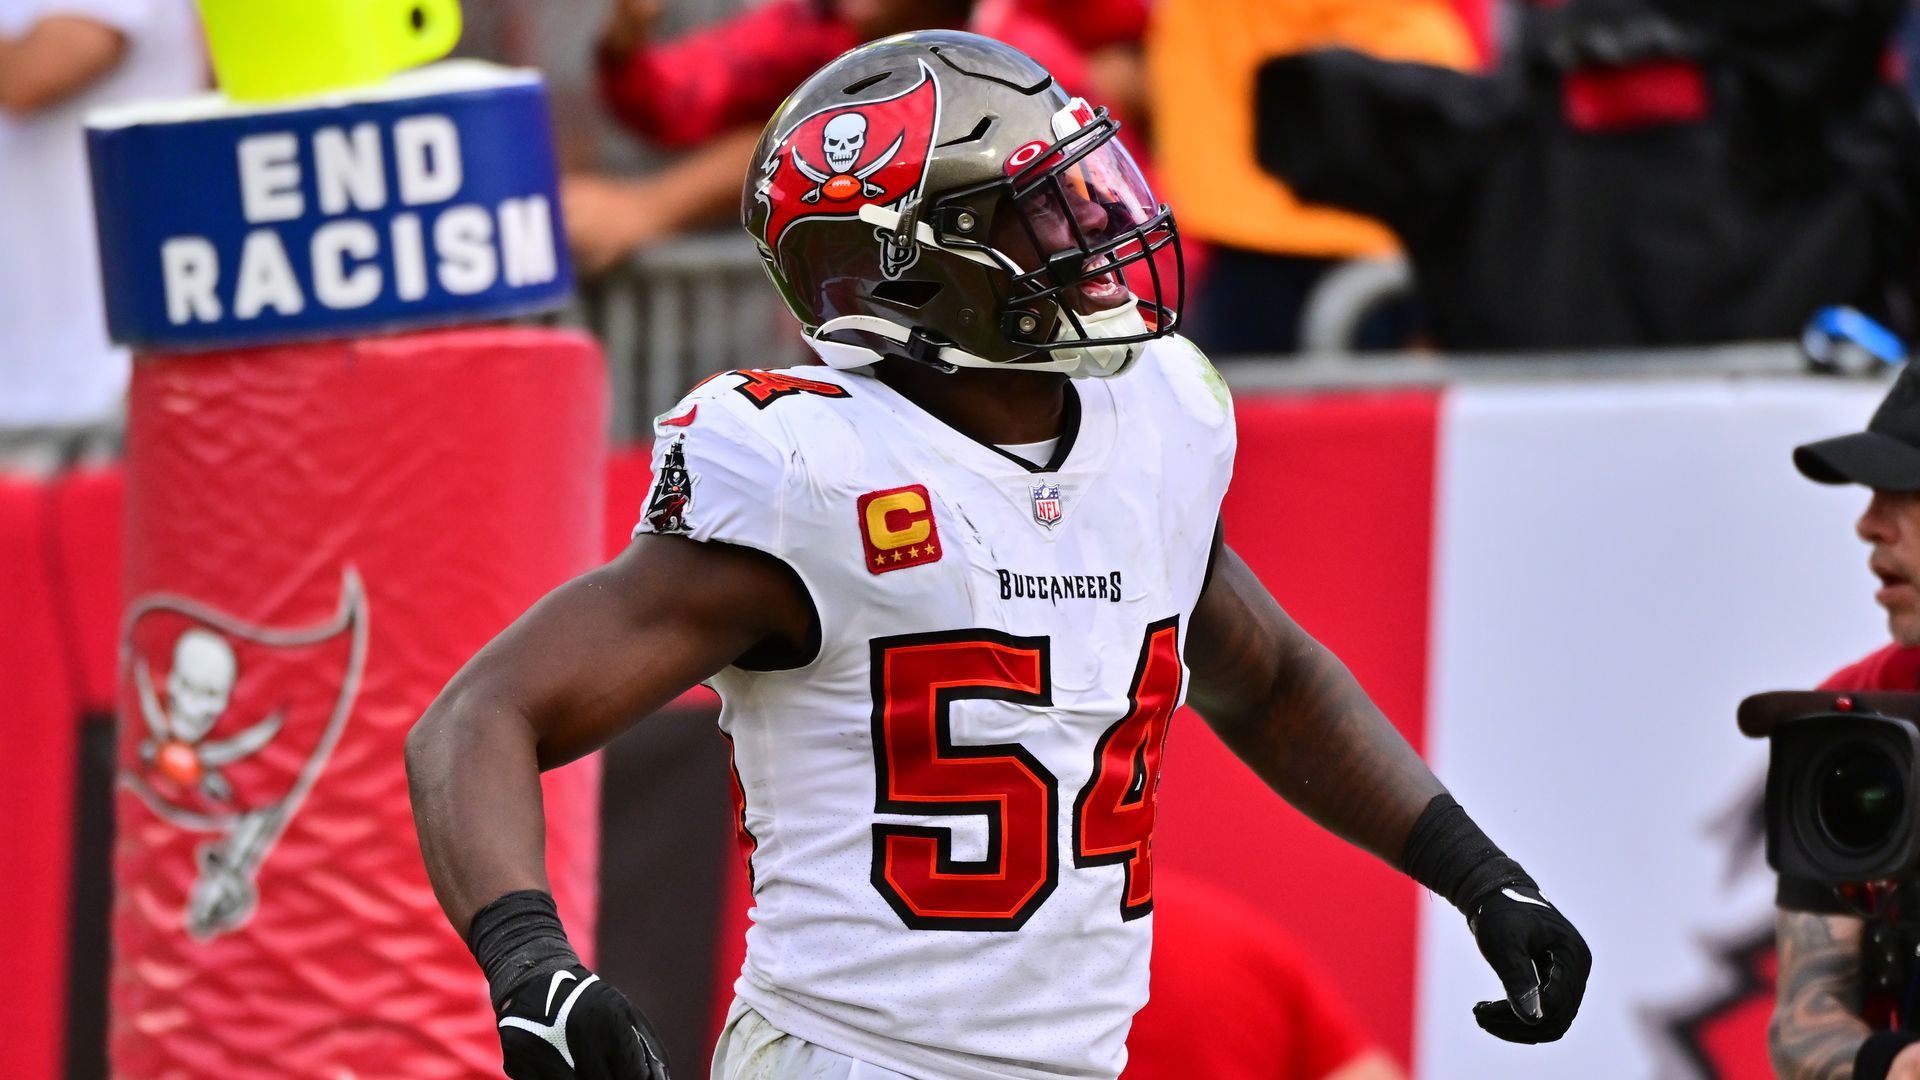 Lavonte David #54 of the Tampa Bay Buccaneers yells on the field with a sign that says "End Racism" behind him.